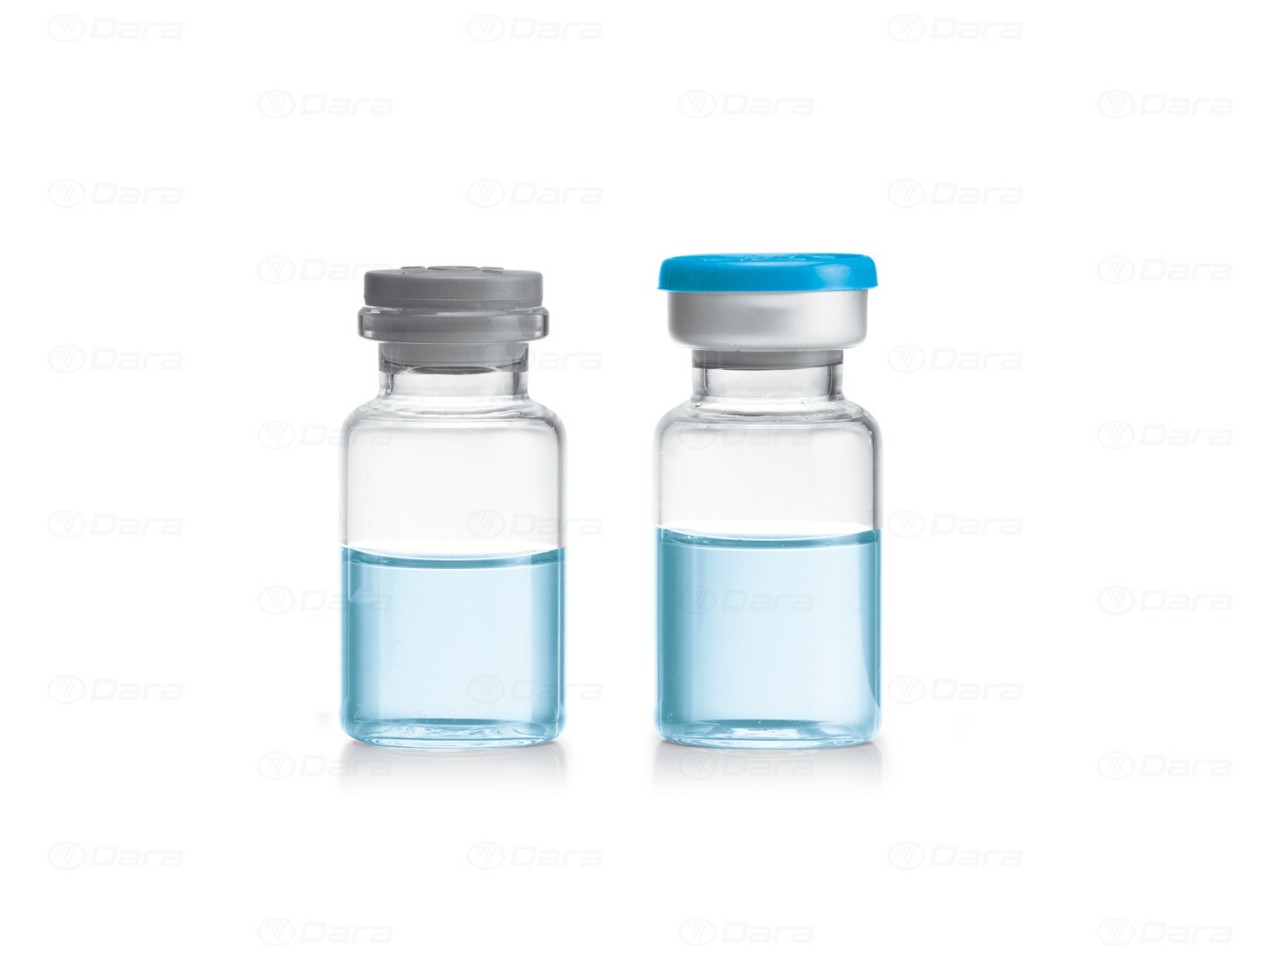 High speed rotary vial cappers